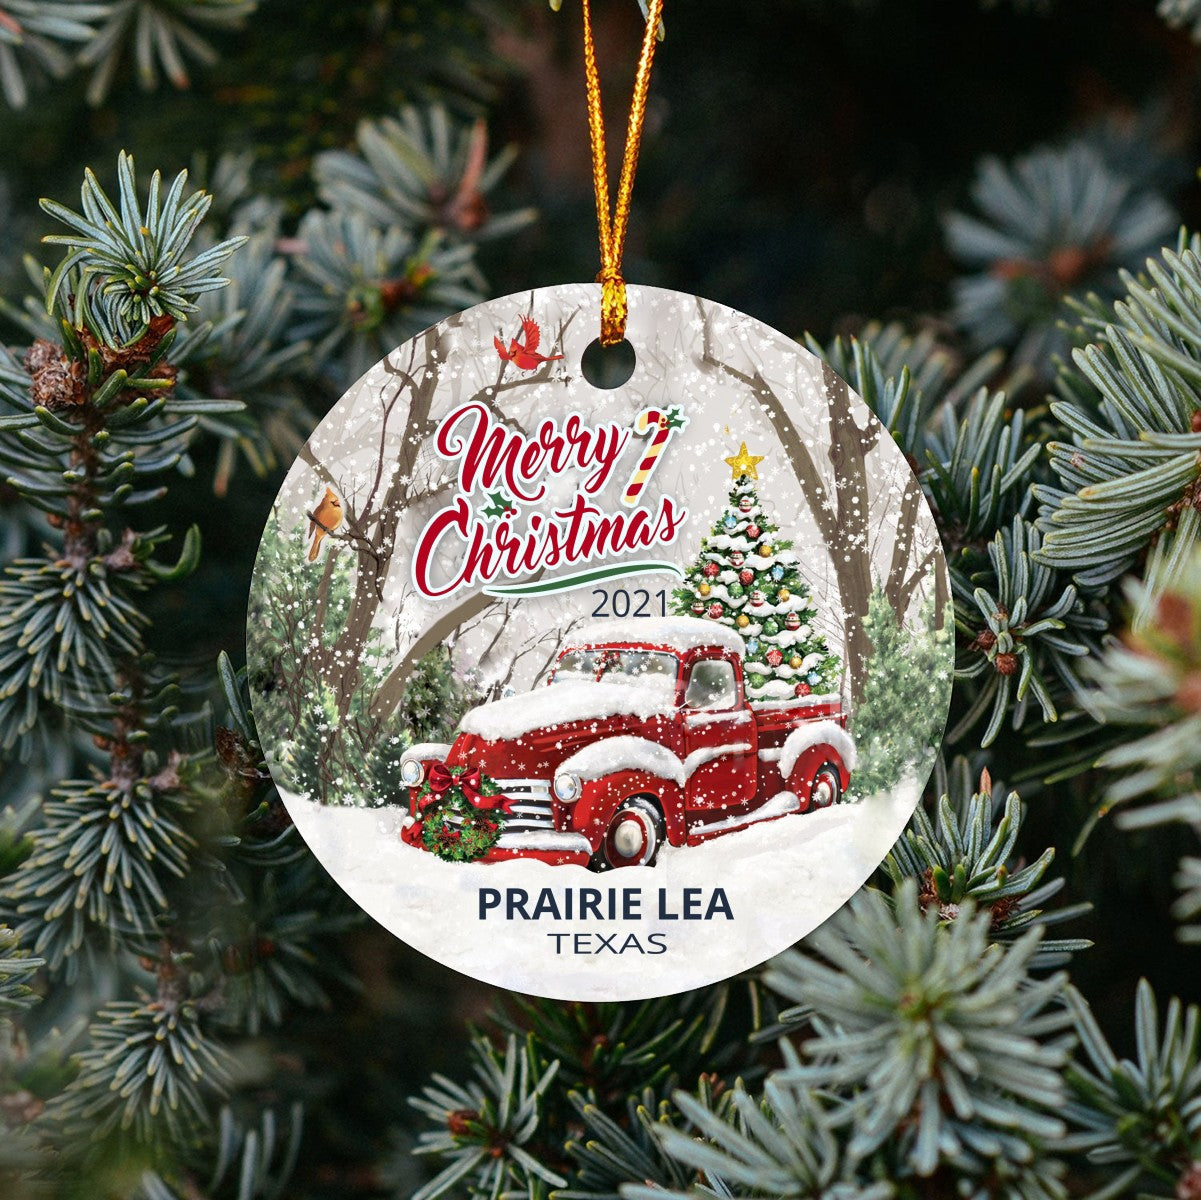 Christmas Tree Ornaments Prairie Lea - Ornament With Name City, State Prairie Lea Texas TX Ornament - Red Truck Xmas Ornaments 3'' Plastic Gift For Family, Friend And Housewarming